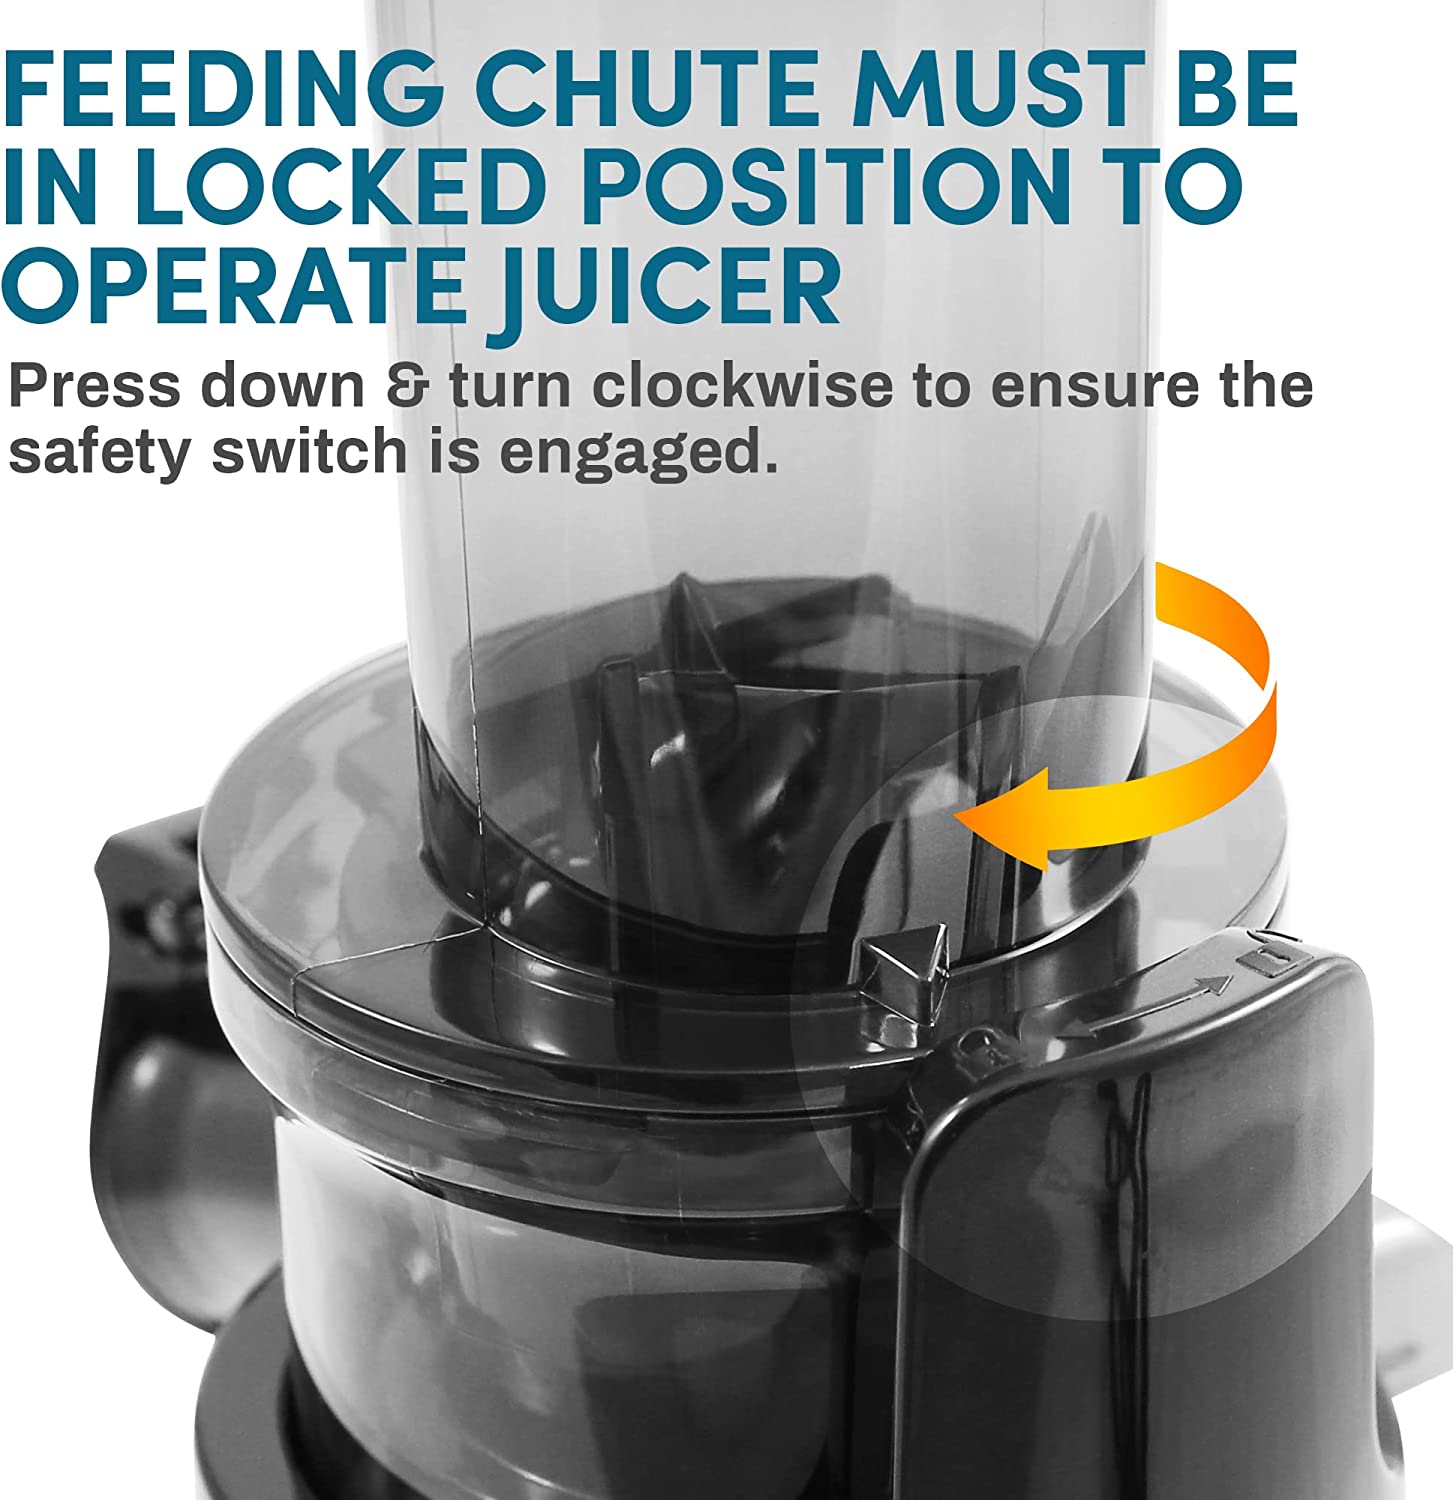 https://bigbigmart.com/wp-content/uploads/2023/05/Elite-Gourmet-EJX600-Compact-Small-Space-Saving-Masticating-Slow-Juicer-Cold-Press-Juice-Extractor-Nutrient-and-Vitamin-Dense-Easy-to-Clean-16-oz-Juice-Cup-Charcoal-Grey2.jpg